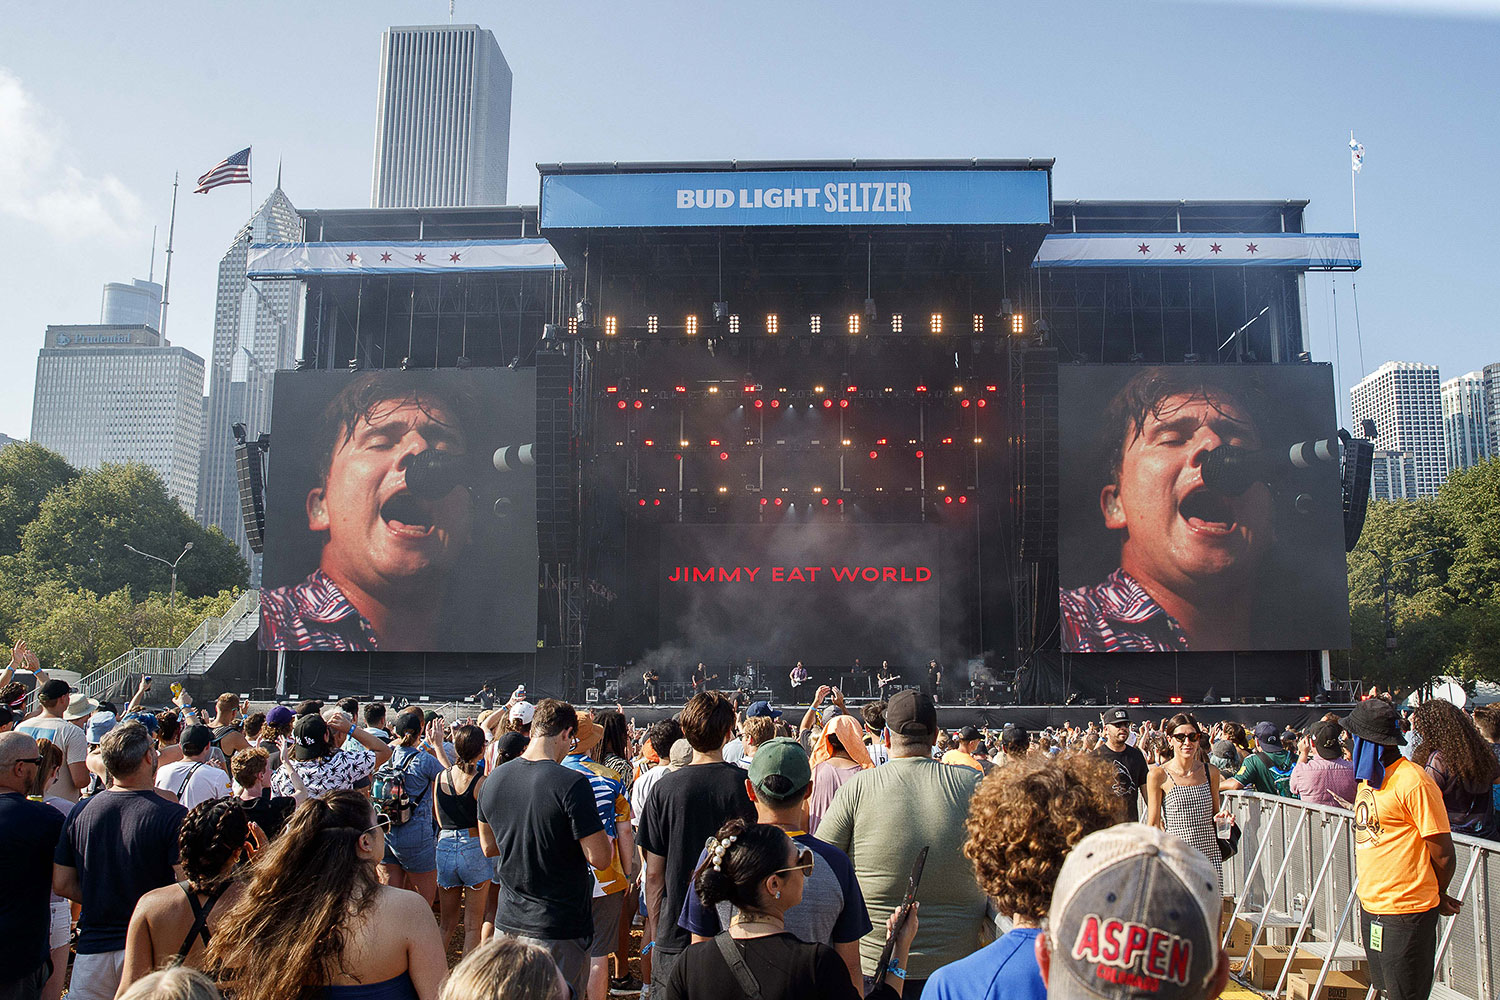 Jimmy Eat World performs at the Bud Light Seltzer stage during the first day of Lollapalooza in Grant Park Thursday July 29, 2021 in Chicago.